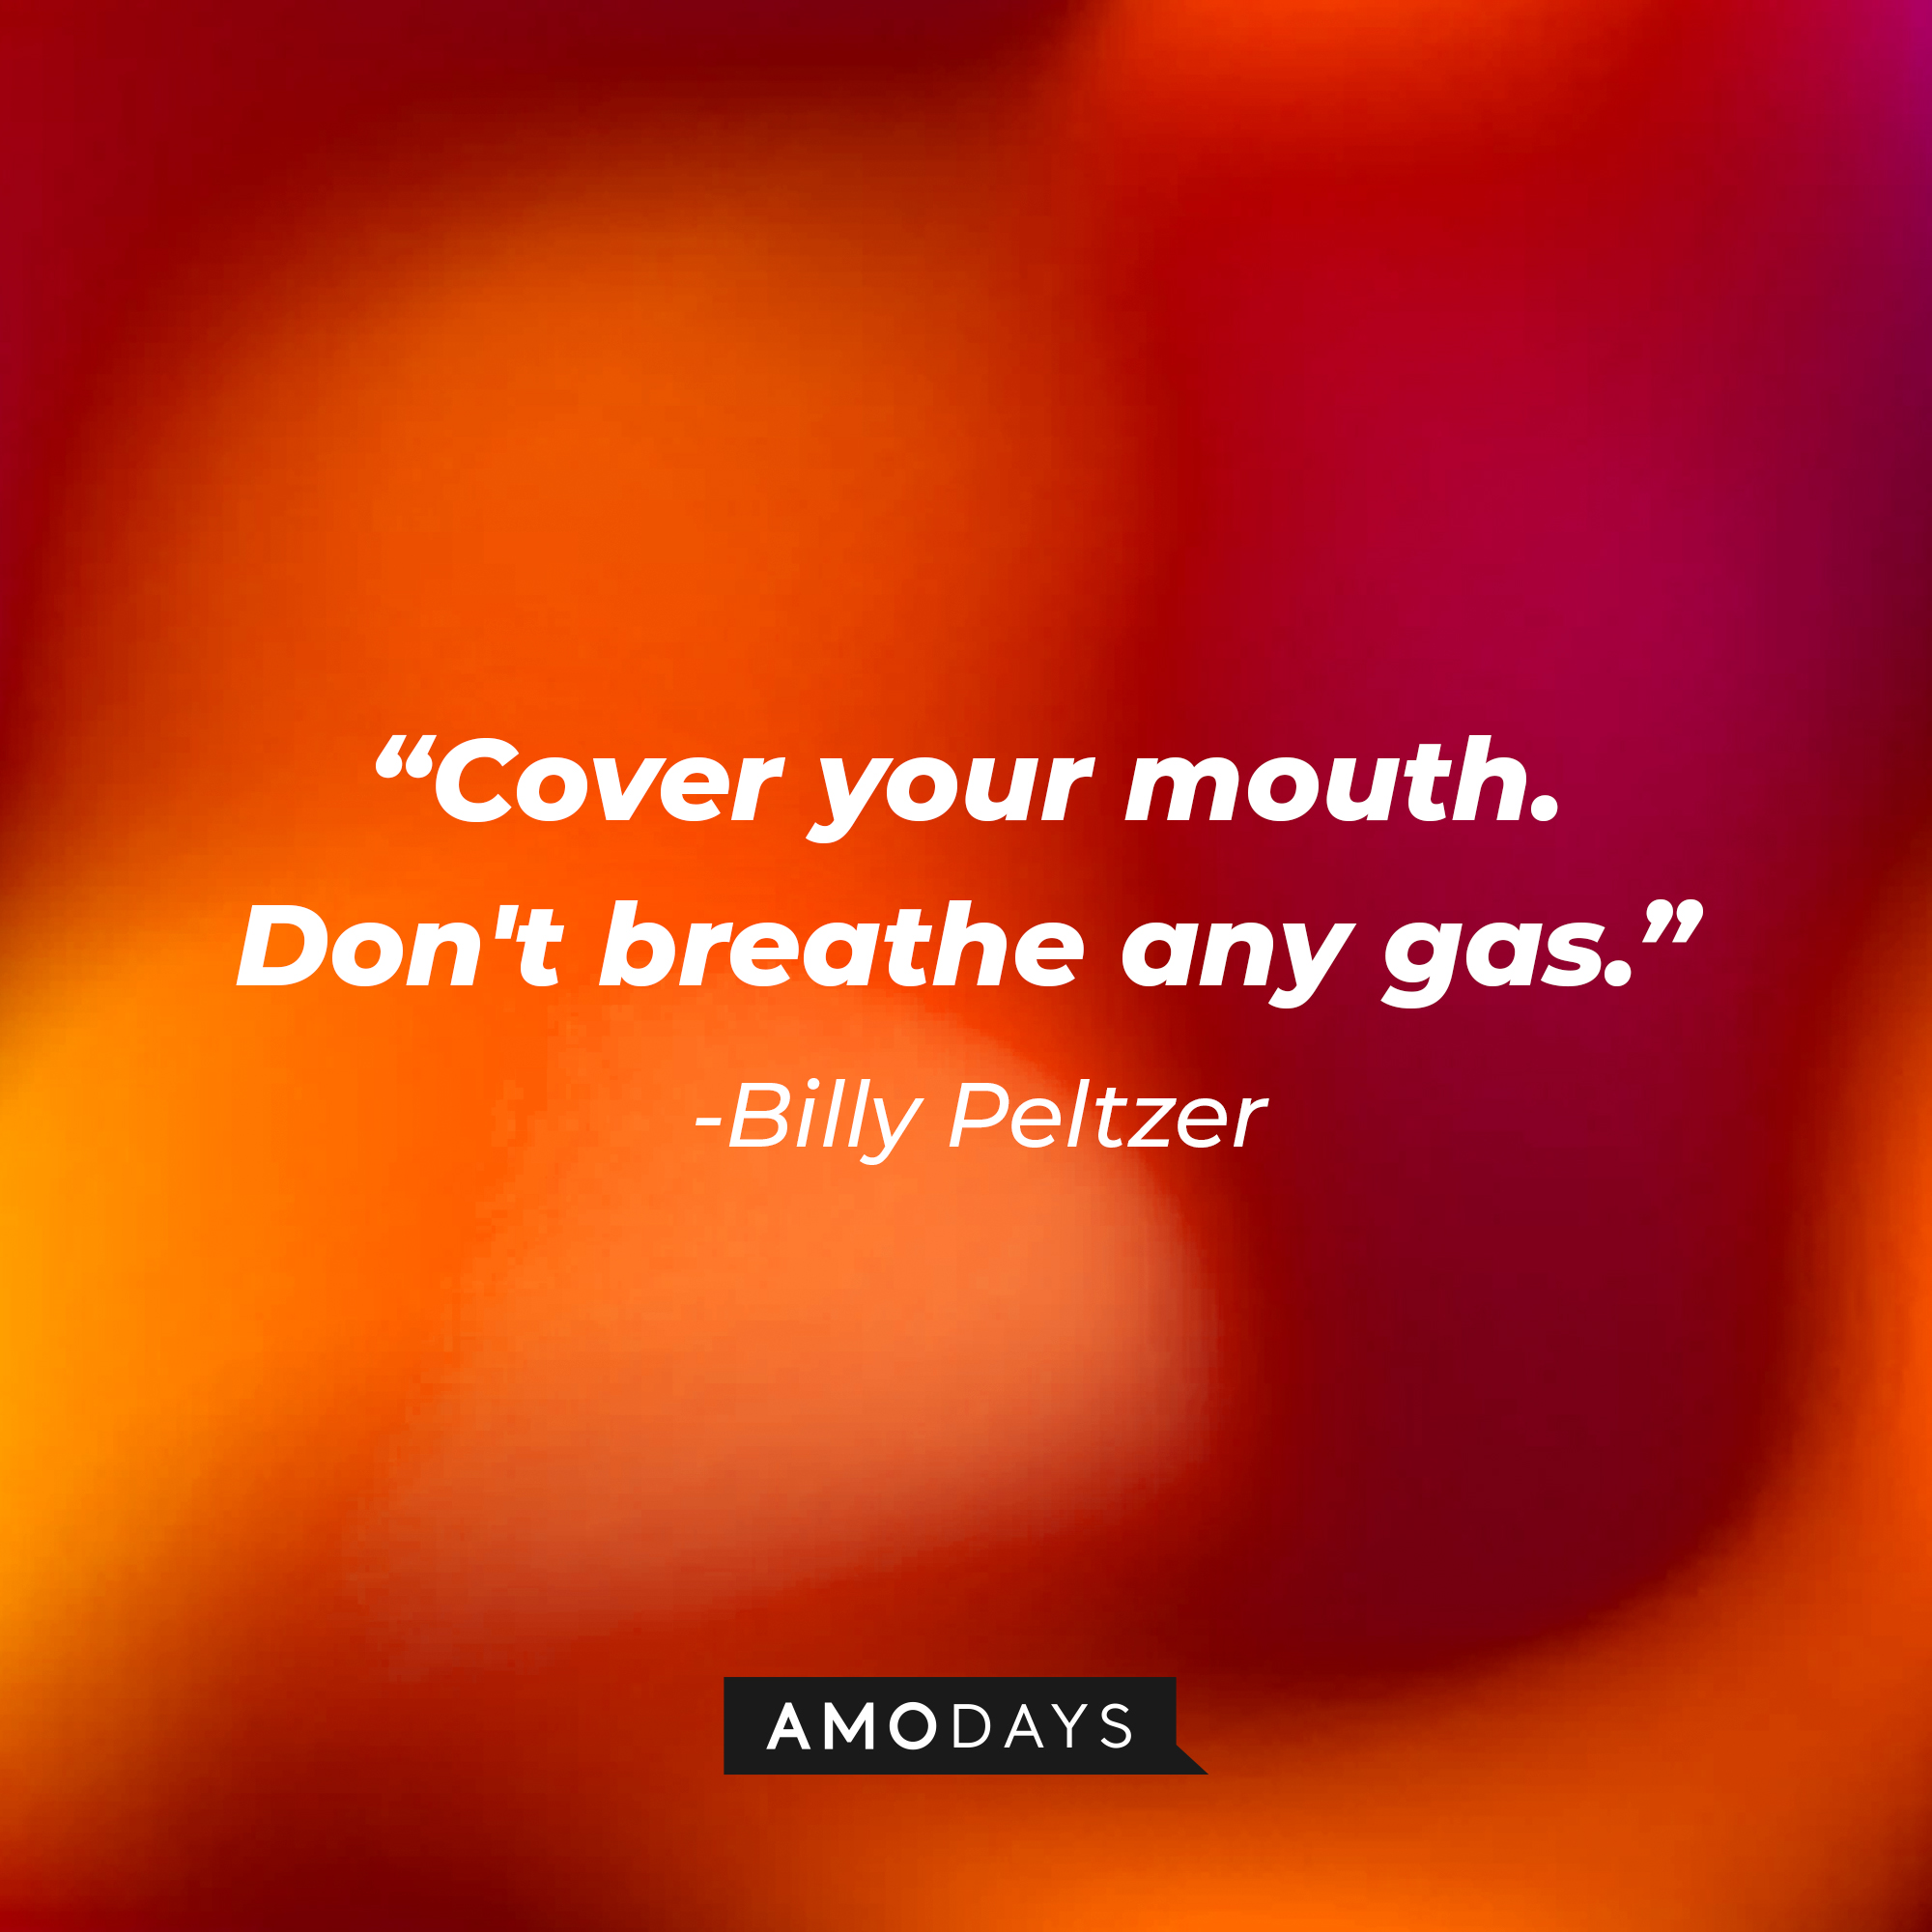 Billy Peltzer's quote: "Cover your mouth. Don't breathe any gas." | Source: AmoDays